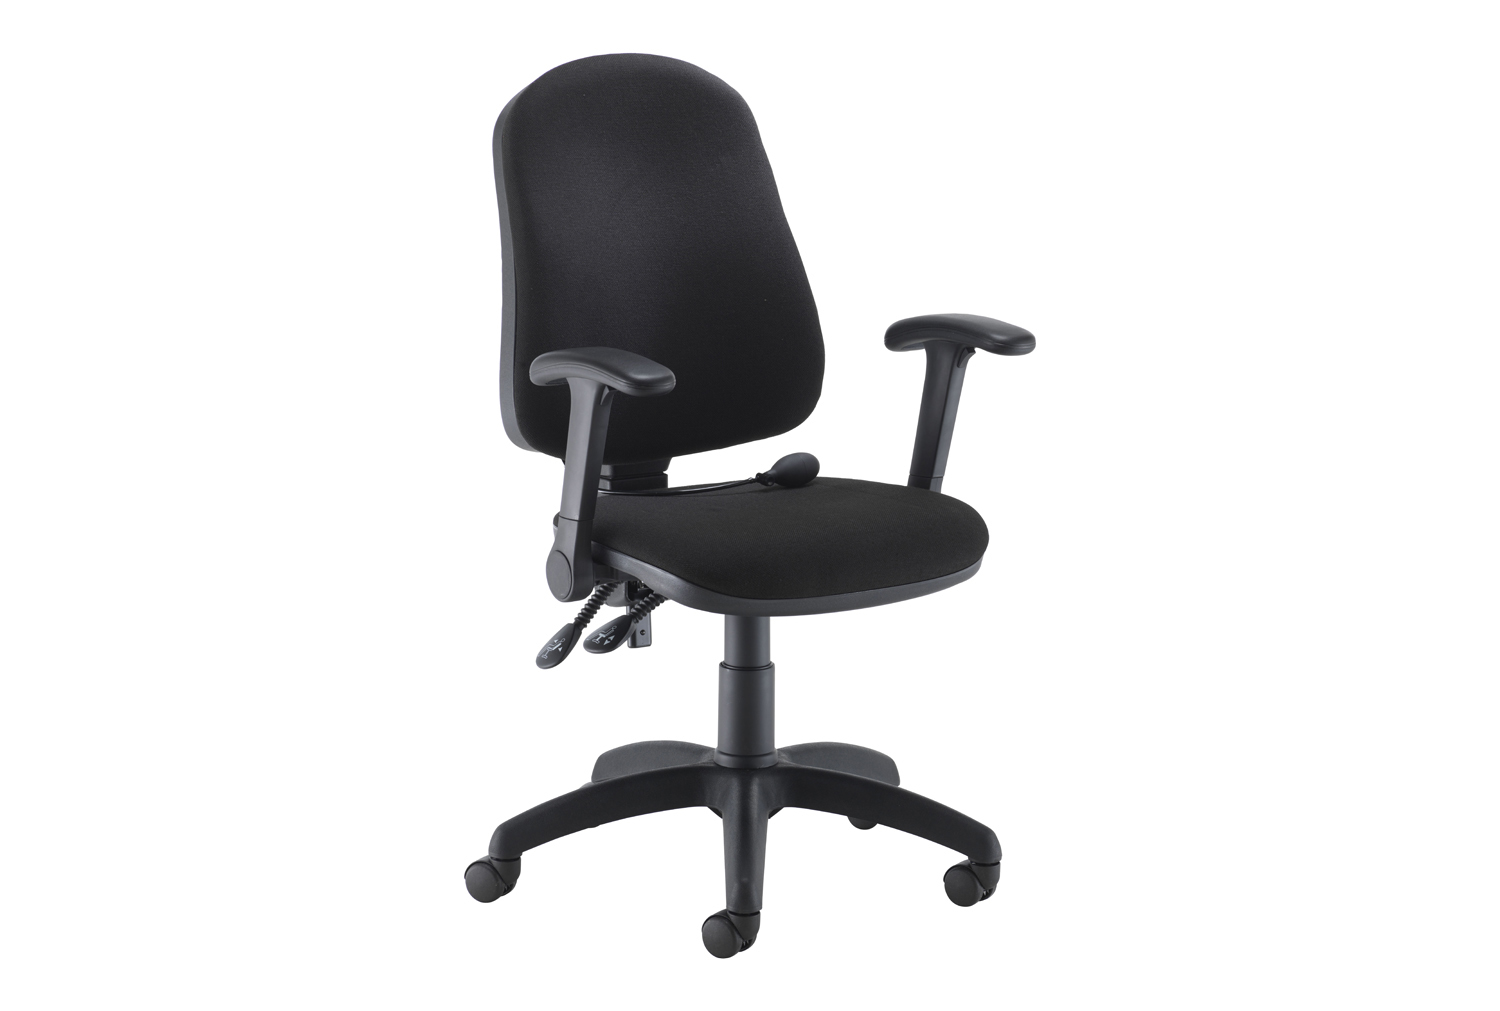 Orchid Lumbar Pump Ergonomic Operator Office Chair With Folding Arms, Black, Fully Installed